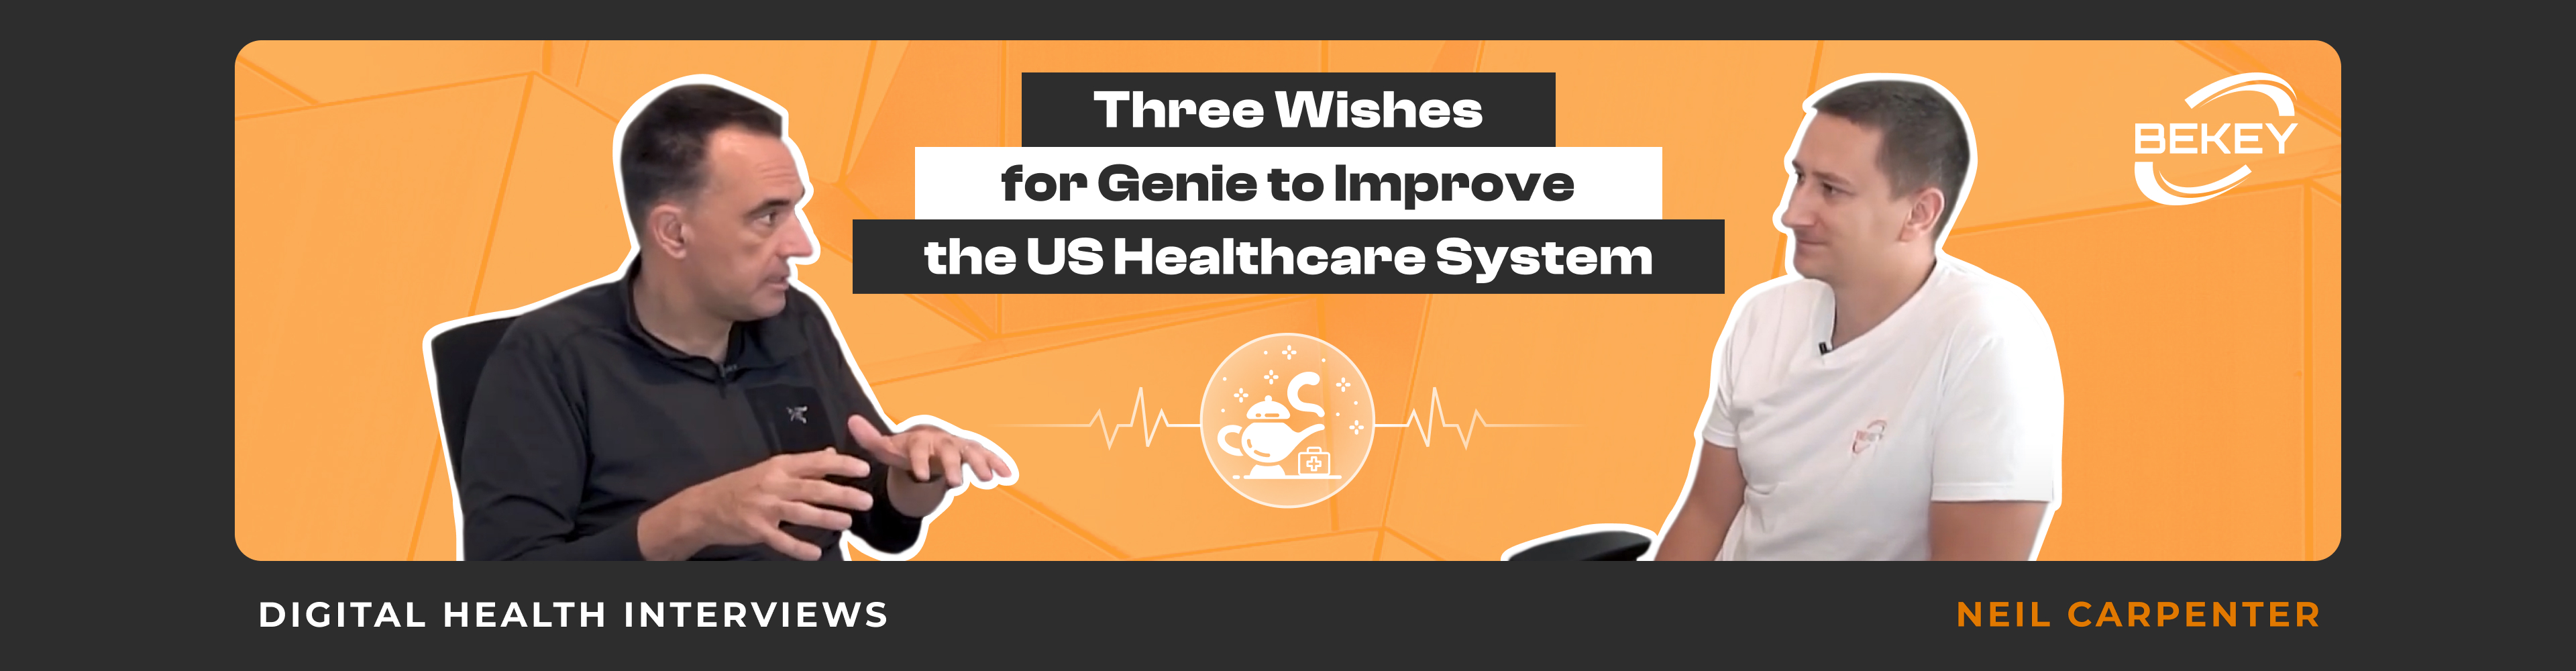 Three Wishes for Genie to Improve the US Healthcare System. Digital Health Interviews: Neil Carpenter - image